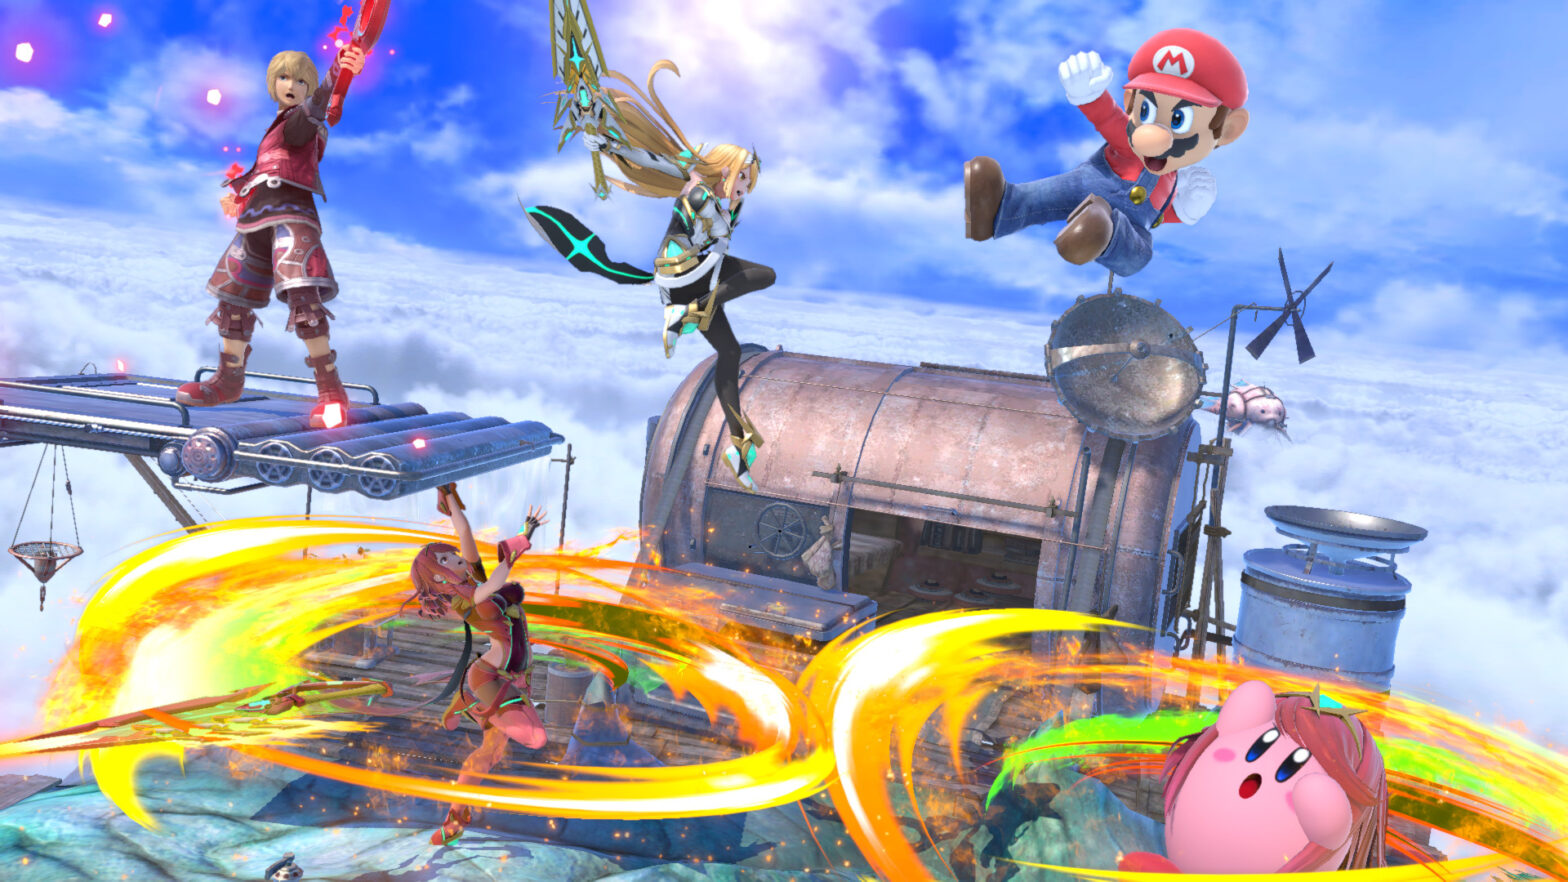 Best Games Inspired By Smash Bros., Ranked